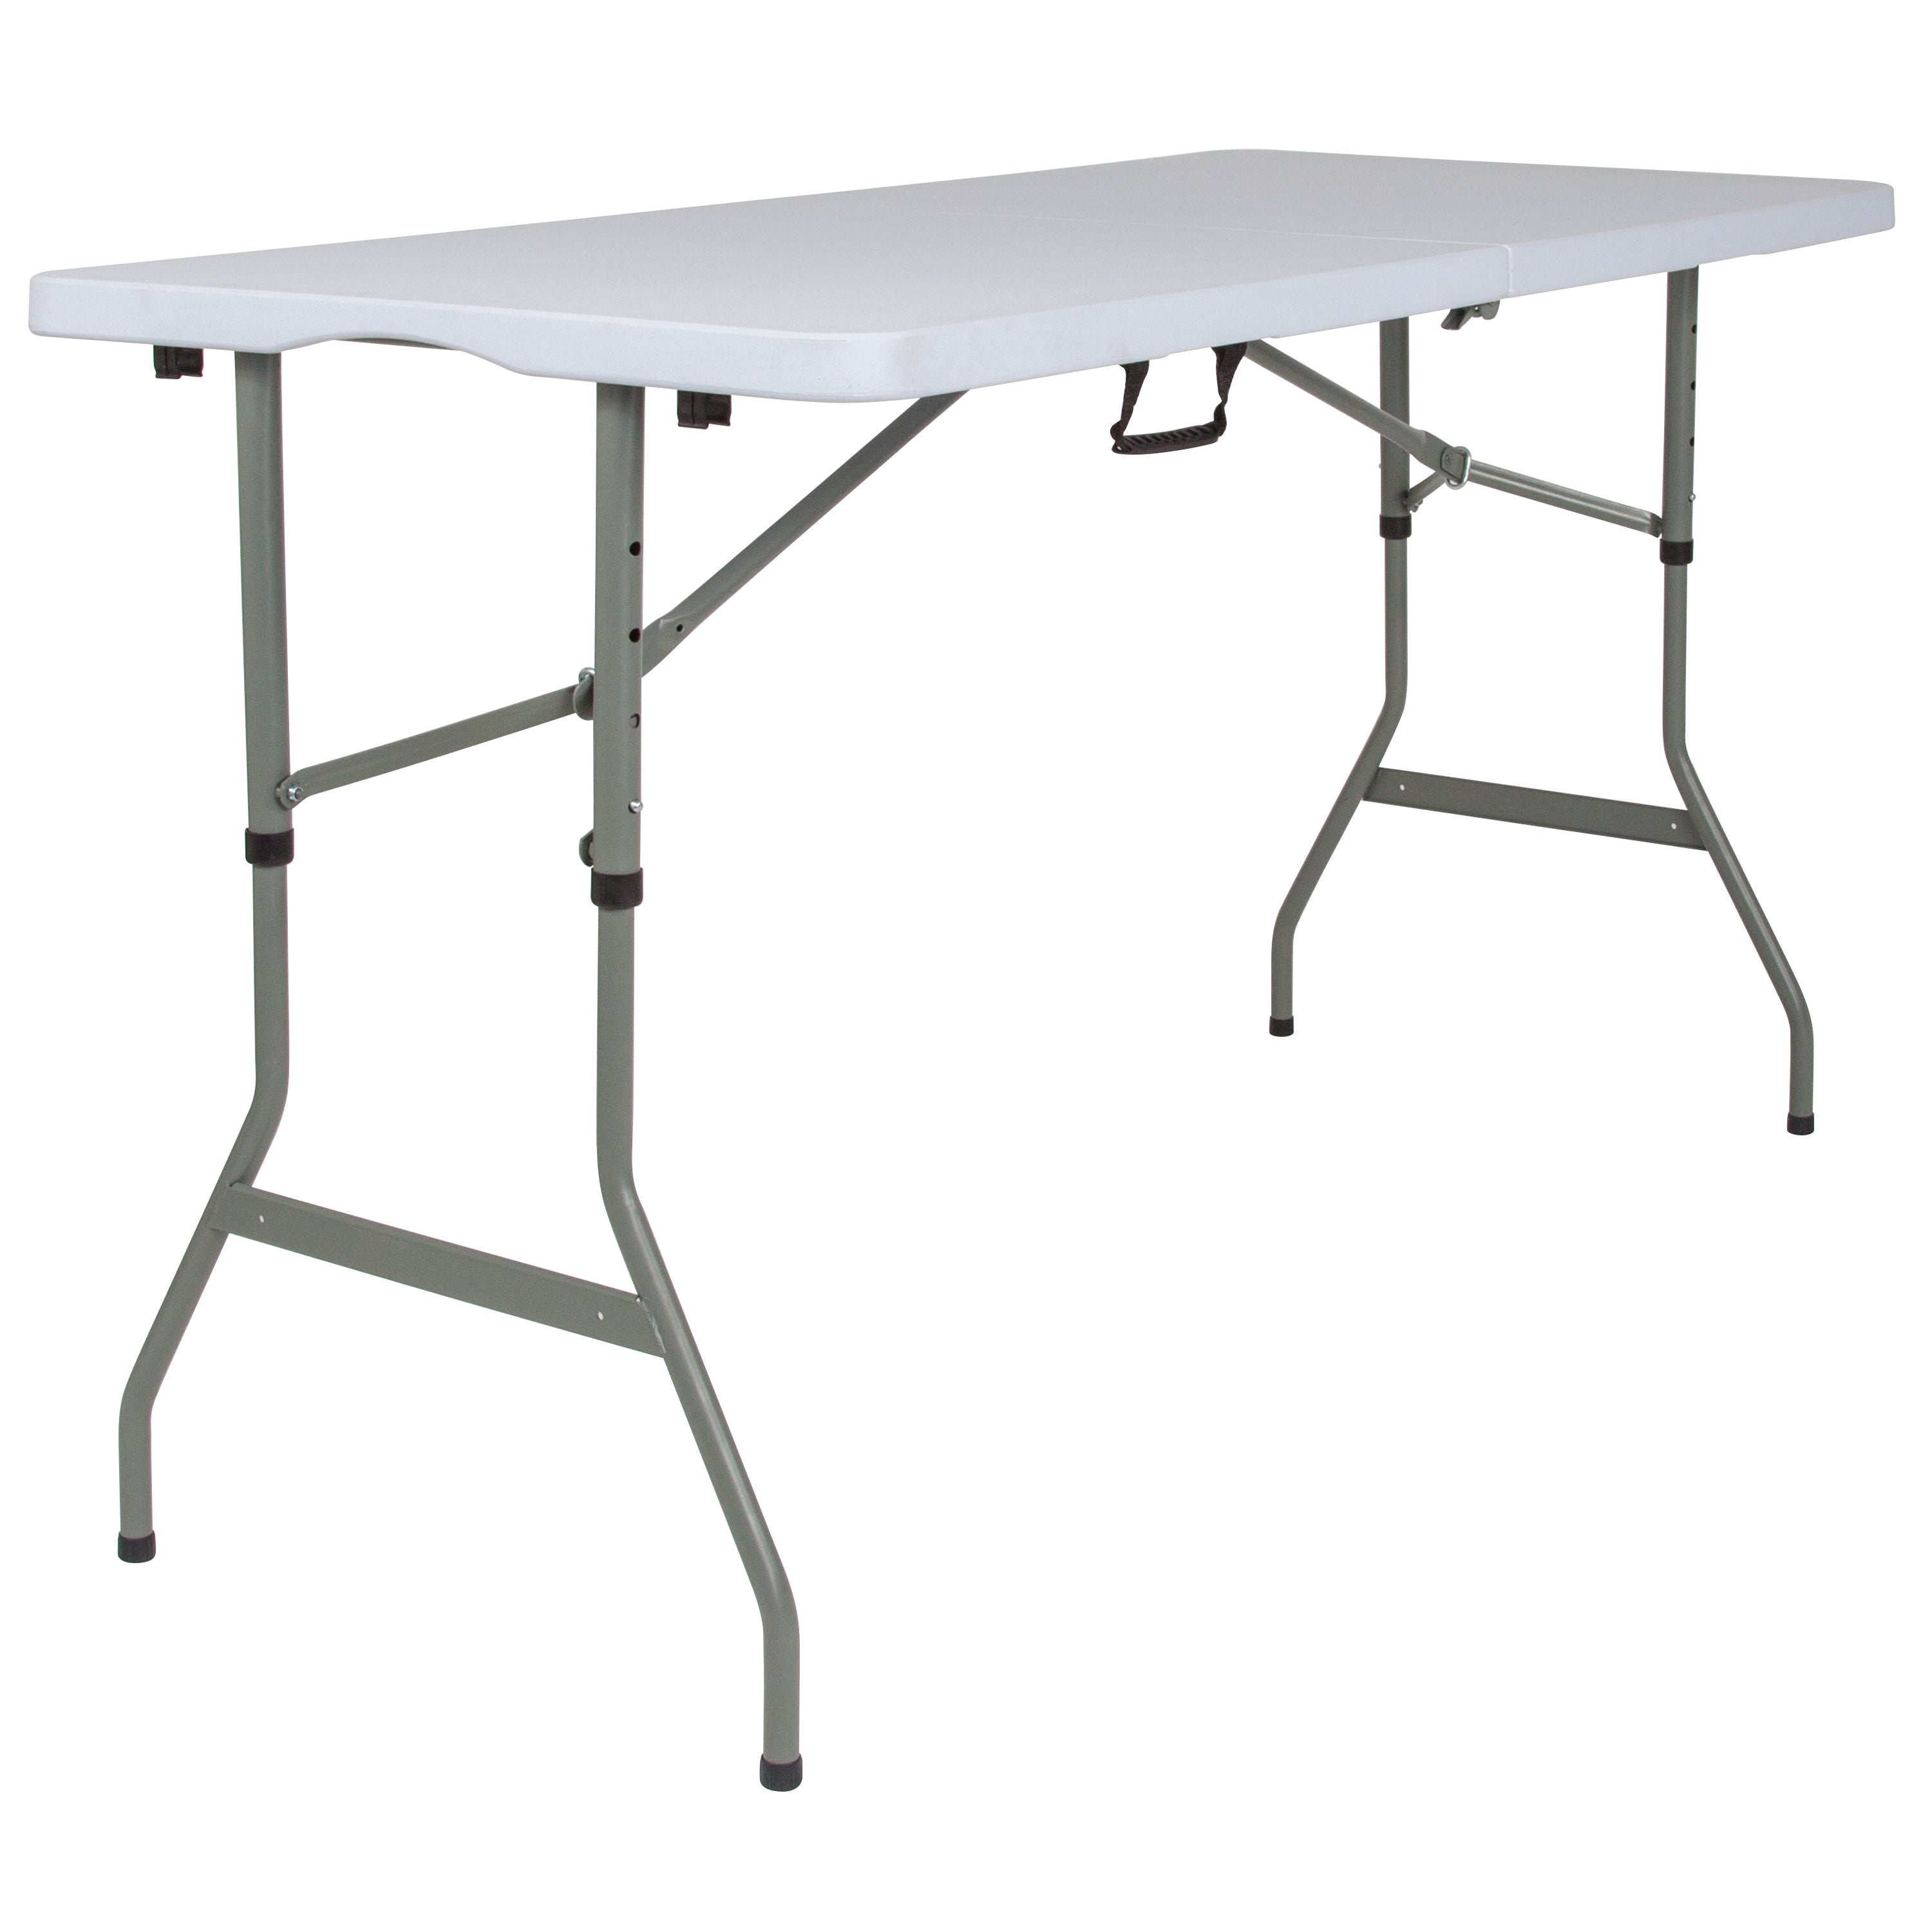 5-Foot Height Adjustable Bi-Fold Plastic Banquet and Event Folding Table with Carrying Handle-Rectangular Plastic Folding Table-Flash Furniture-Wall2Wall Furnishings